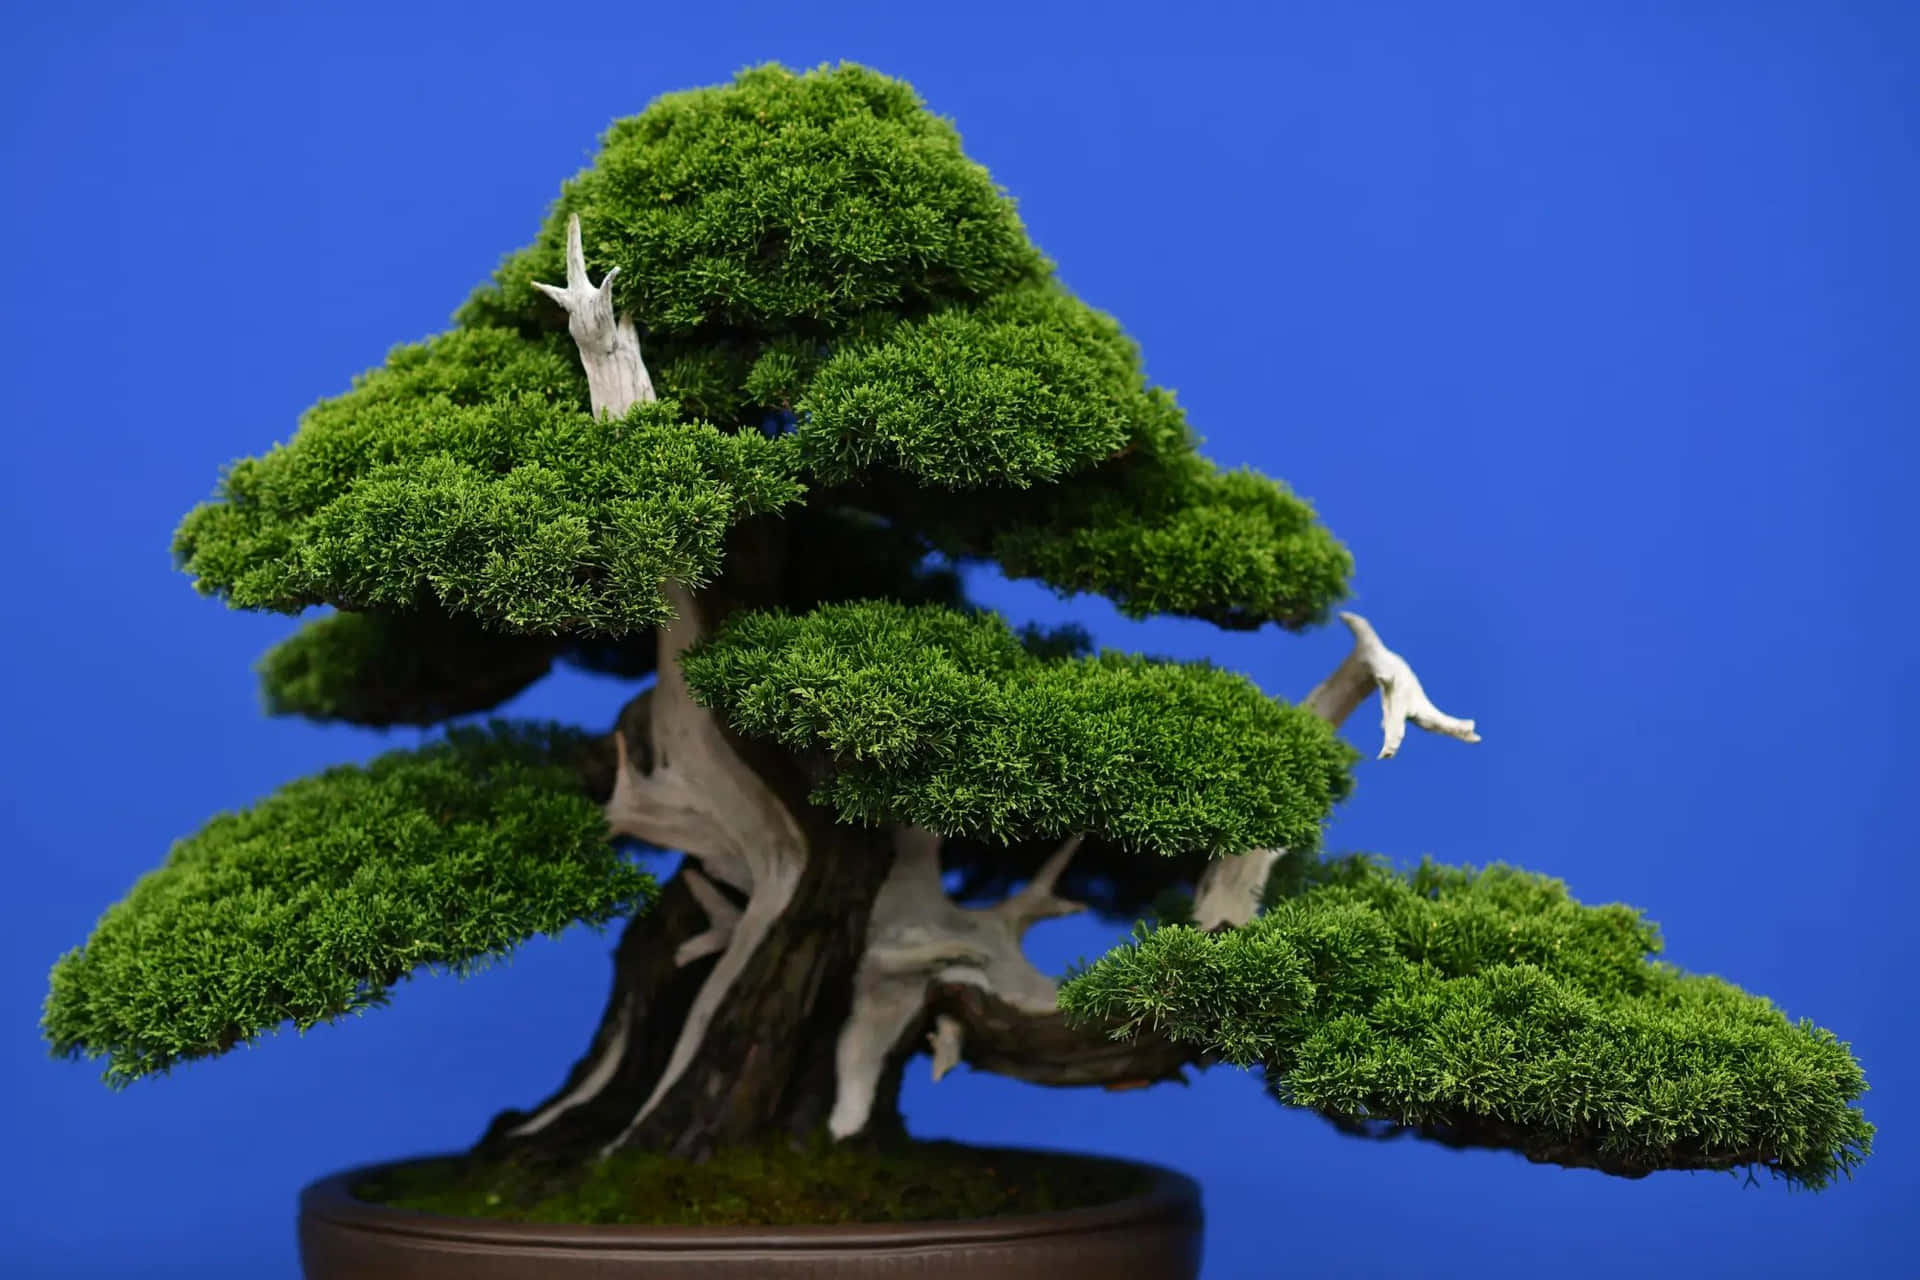 Discover a surreal world of beauty from this majestic bonsai tree.